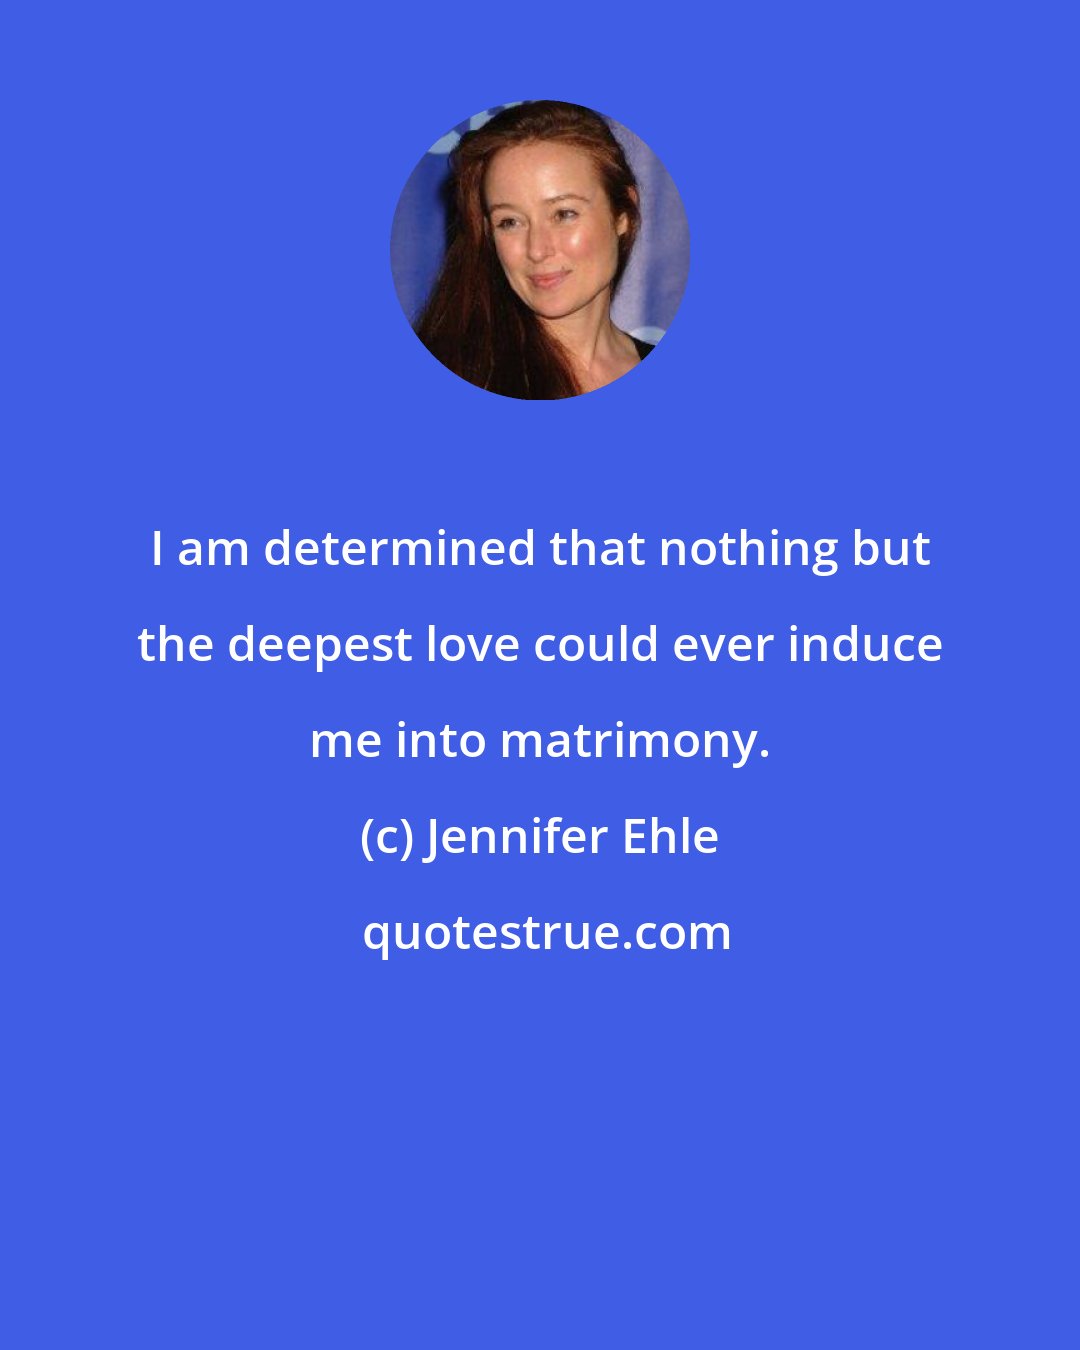 Jennifer Ehle: I am determined that nothing but the deepest love could ever induce me into matrimony.